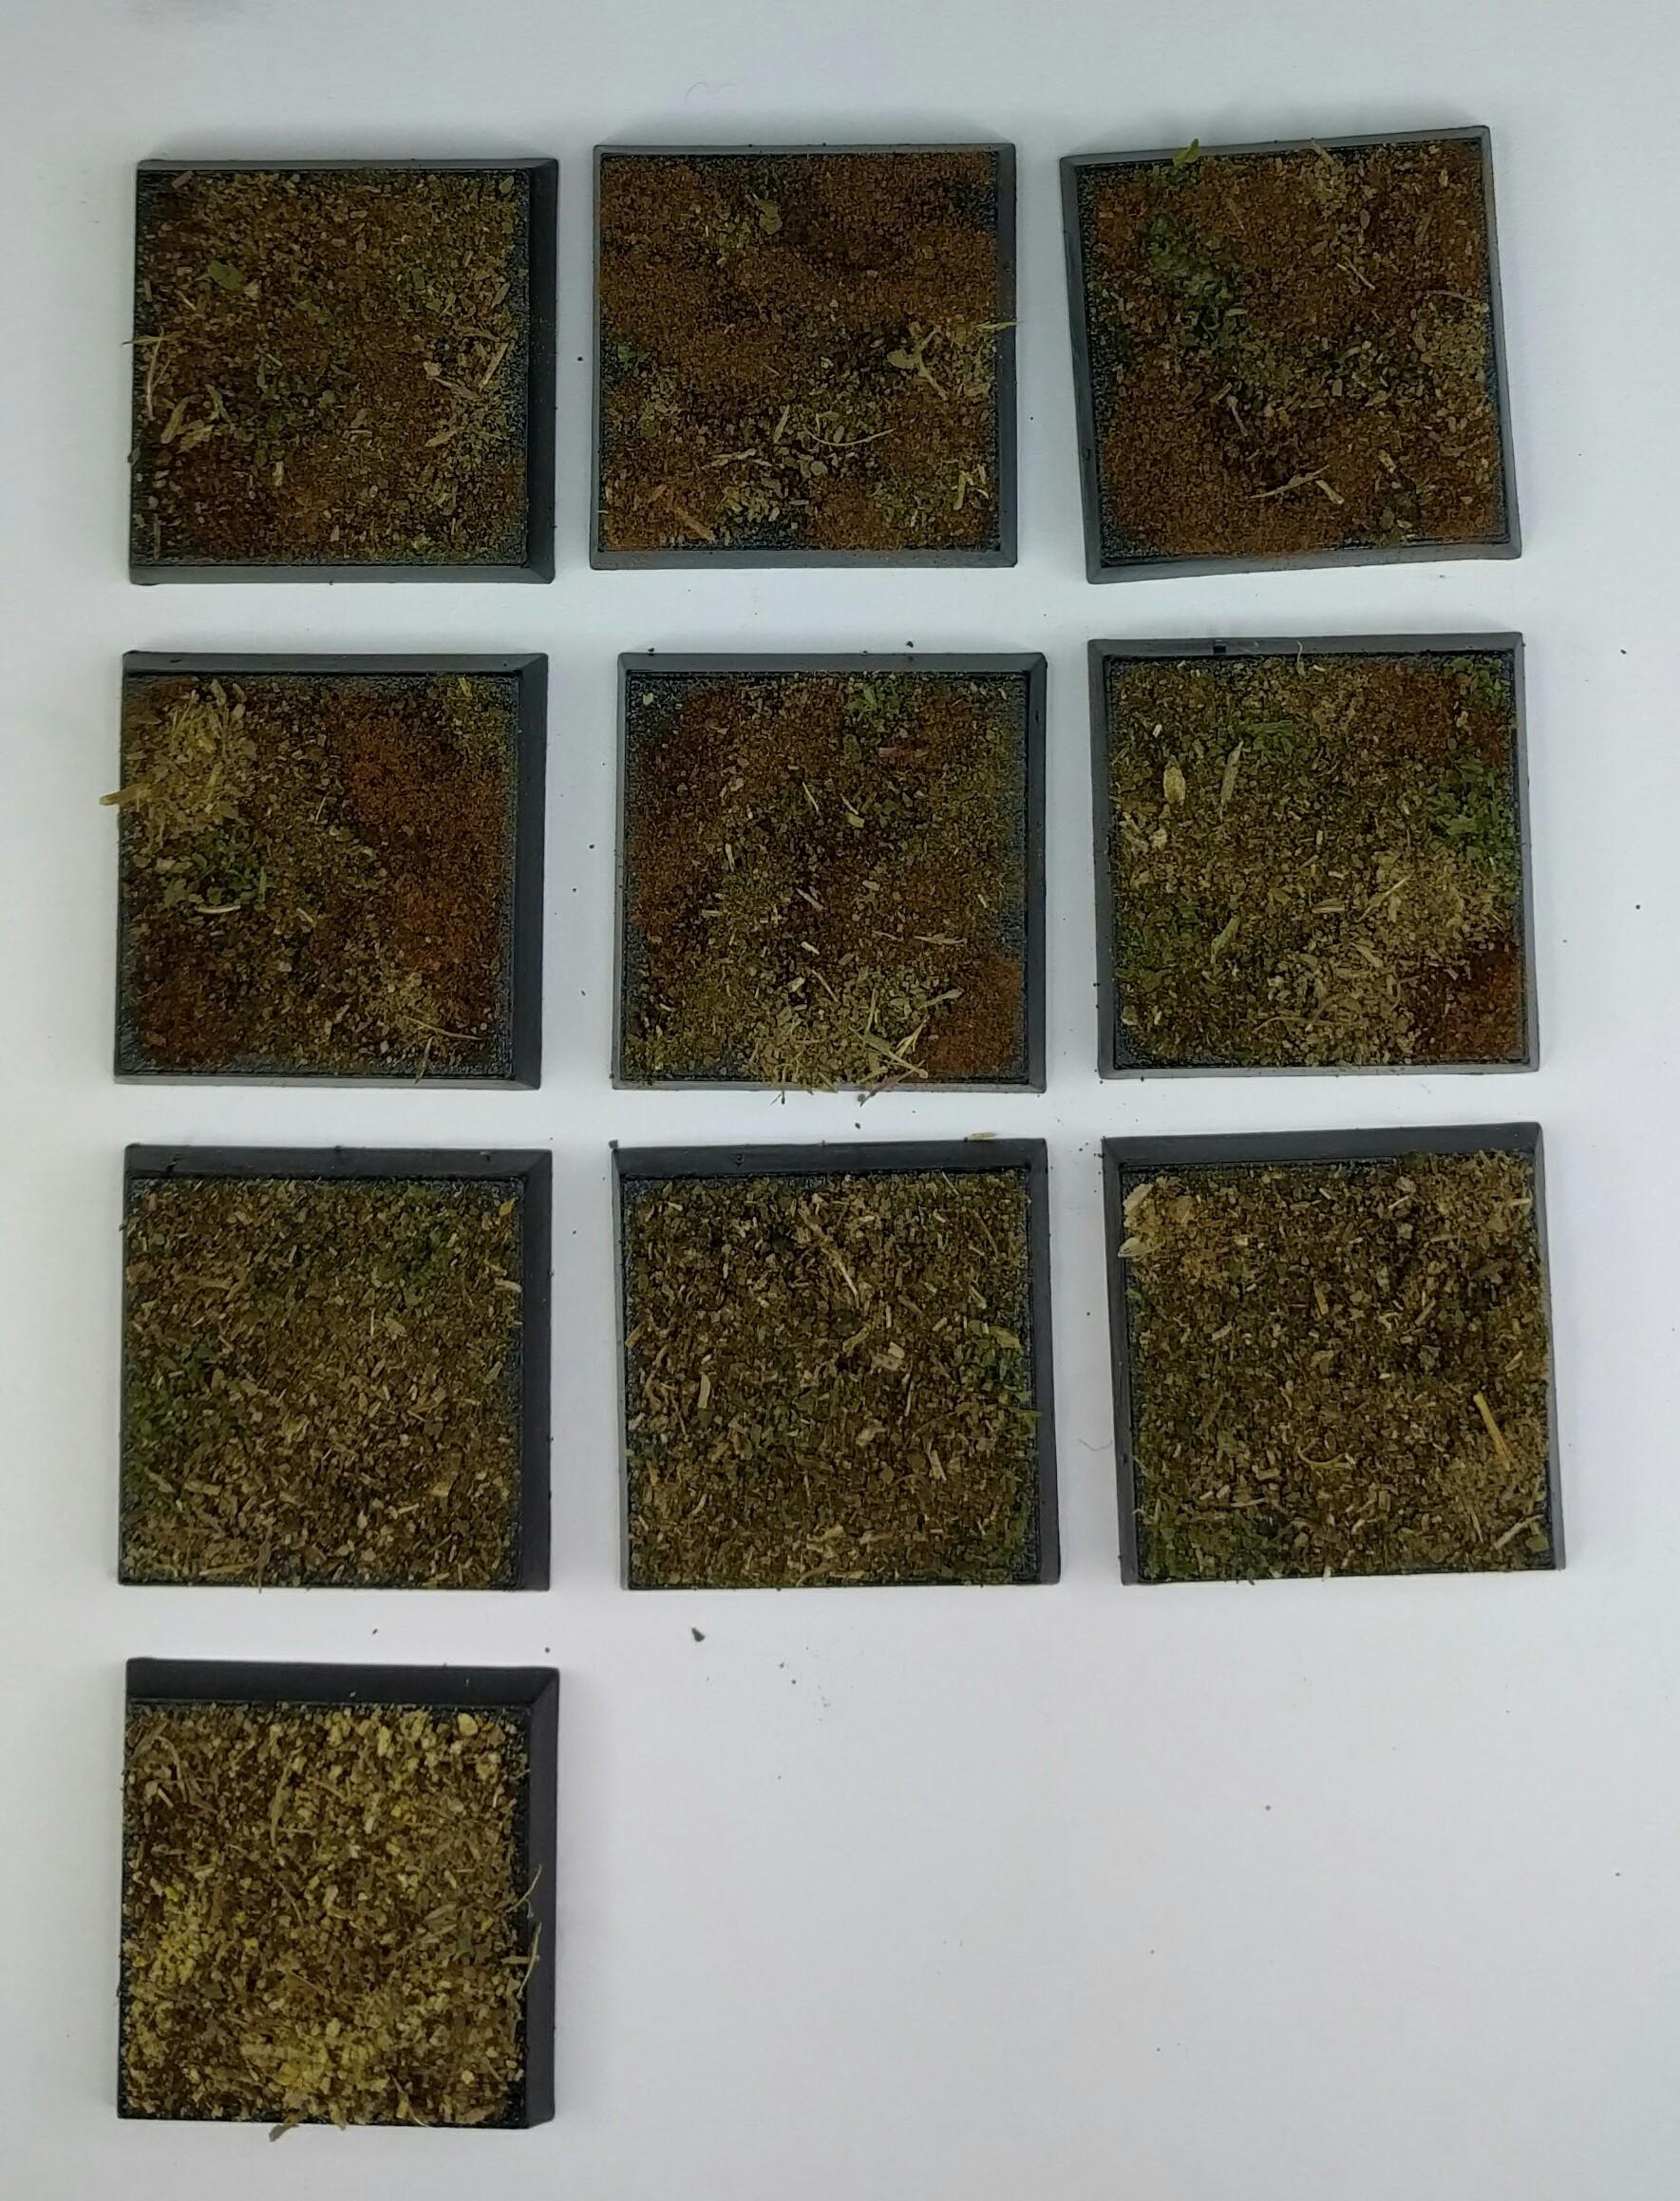 Spices after blender for cheap basing material